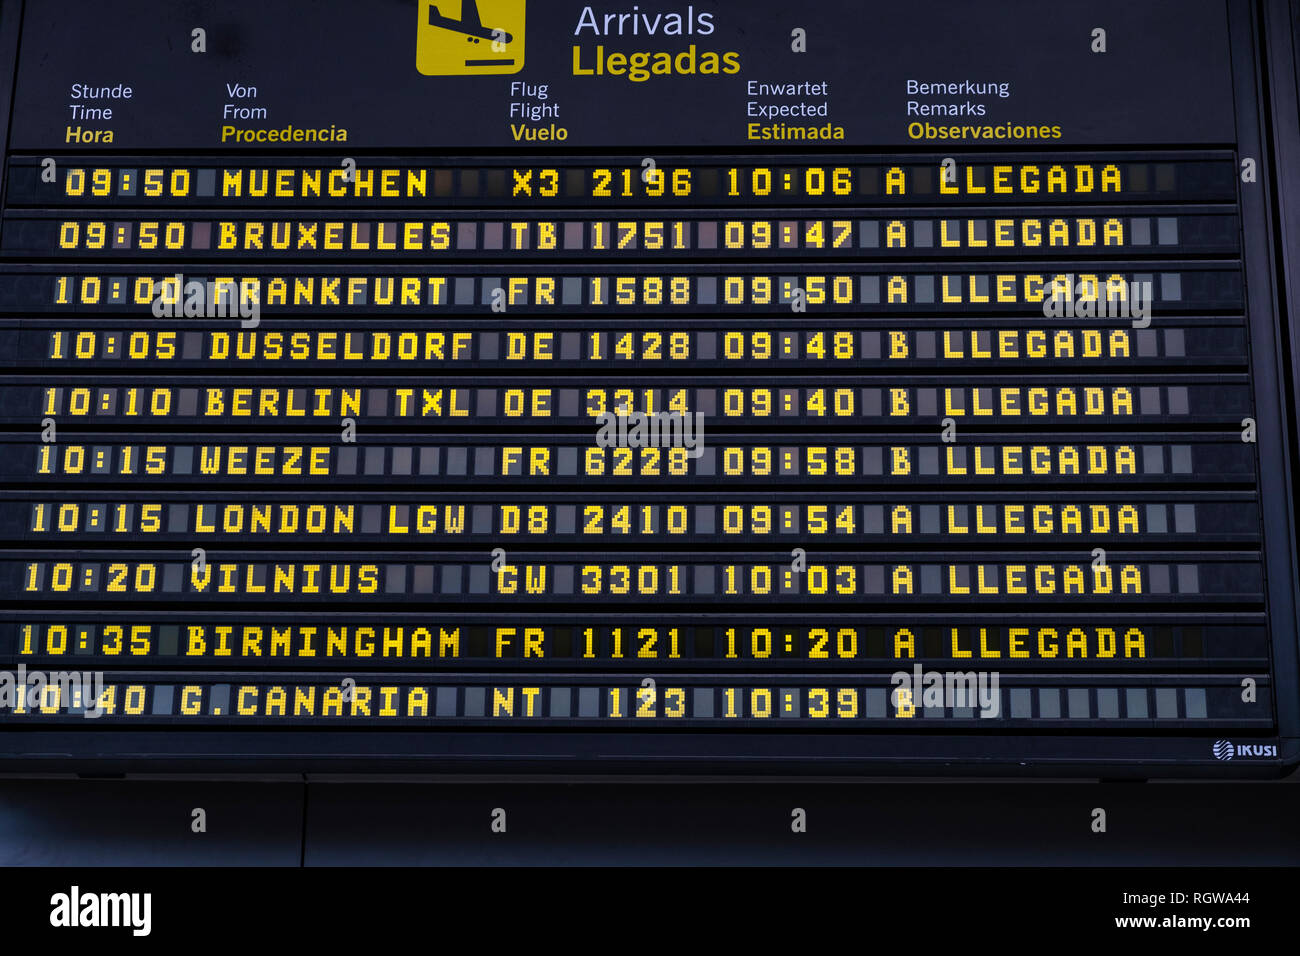 Arrivals timetable notification board at Reina Sofia Tenerife south airport, Canary Islands, Spain Stock Photo